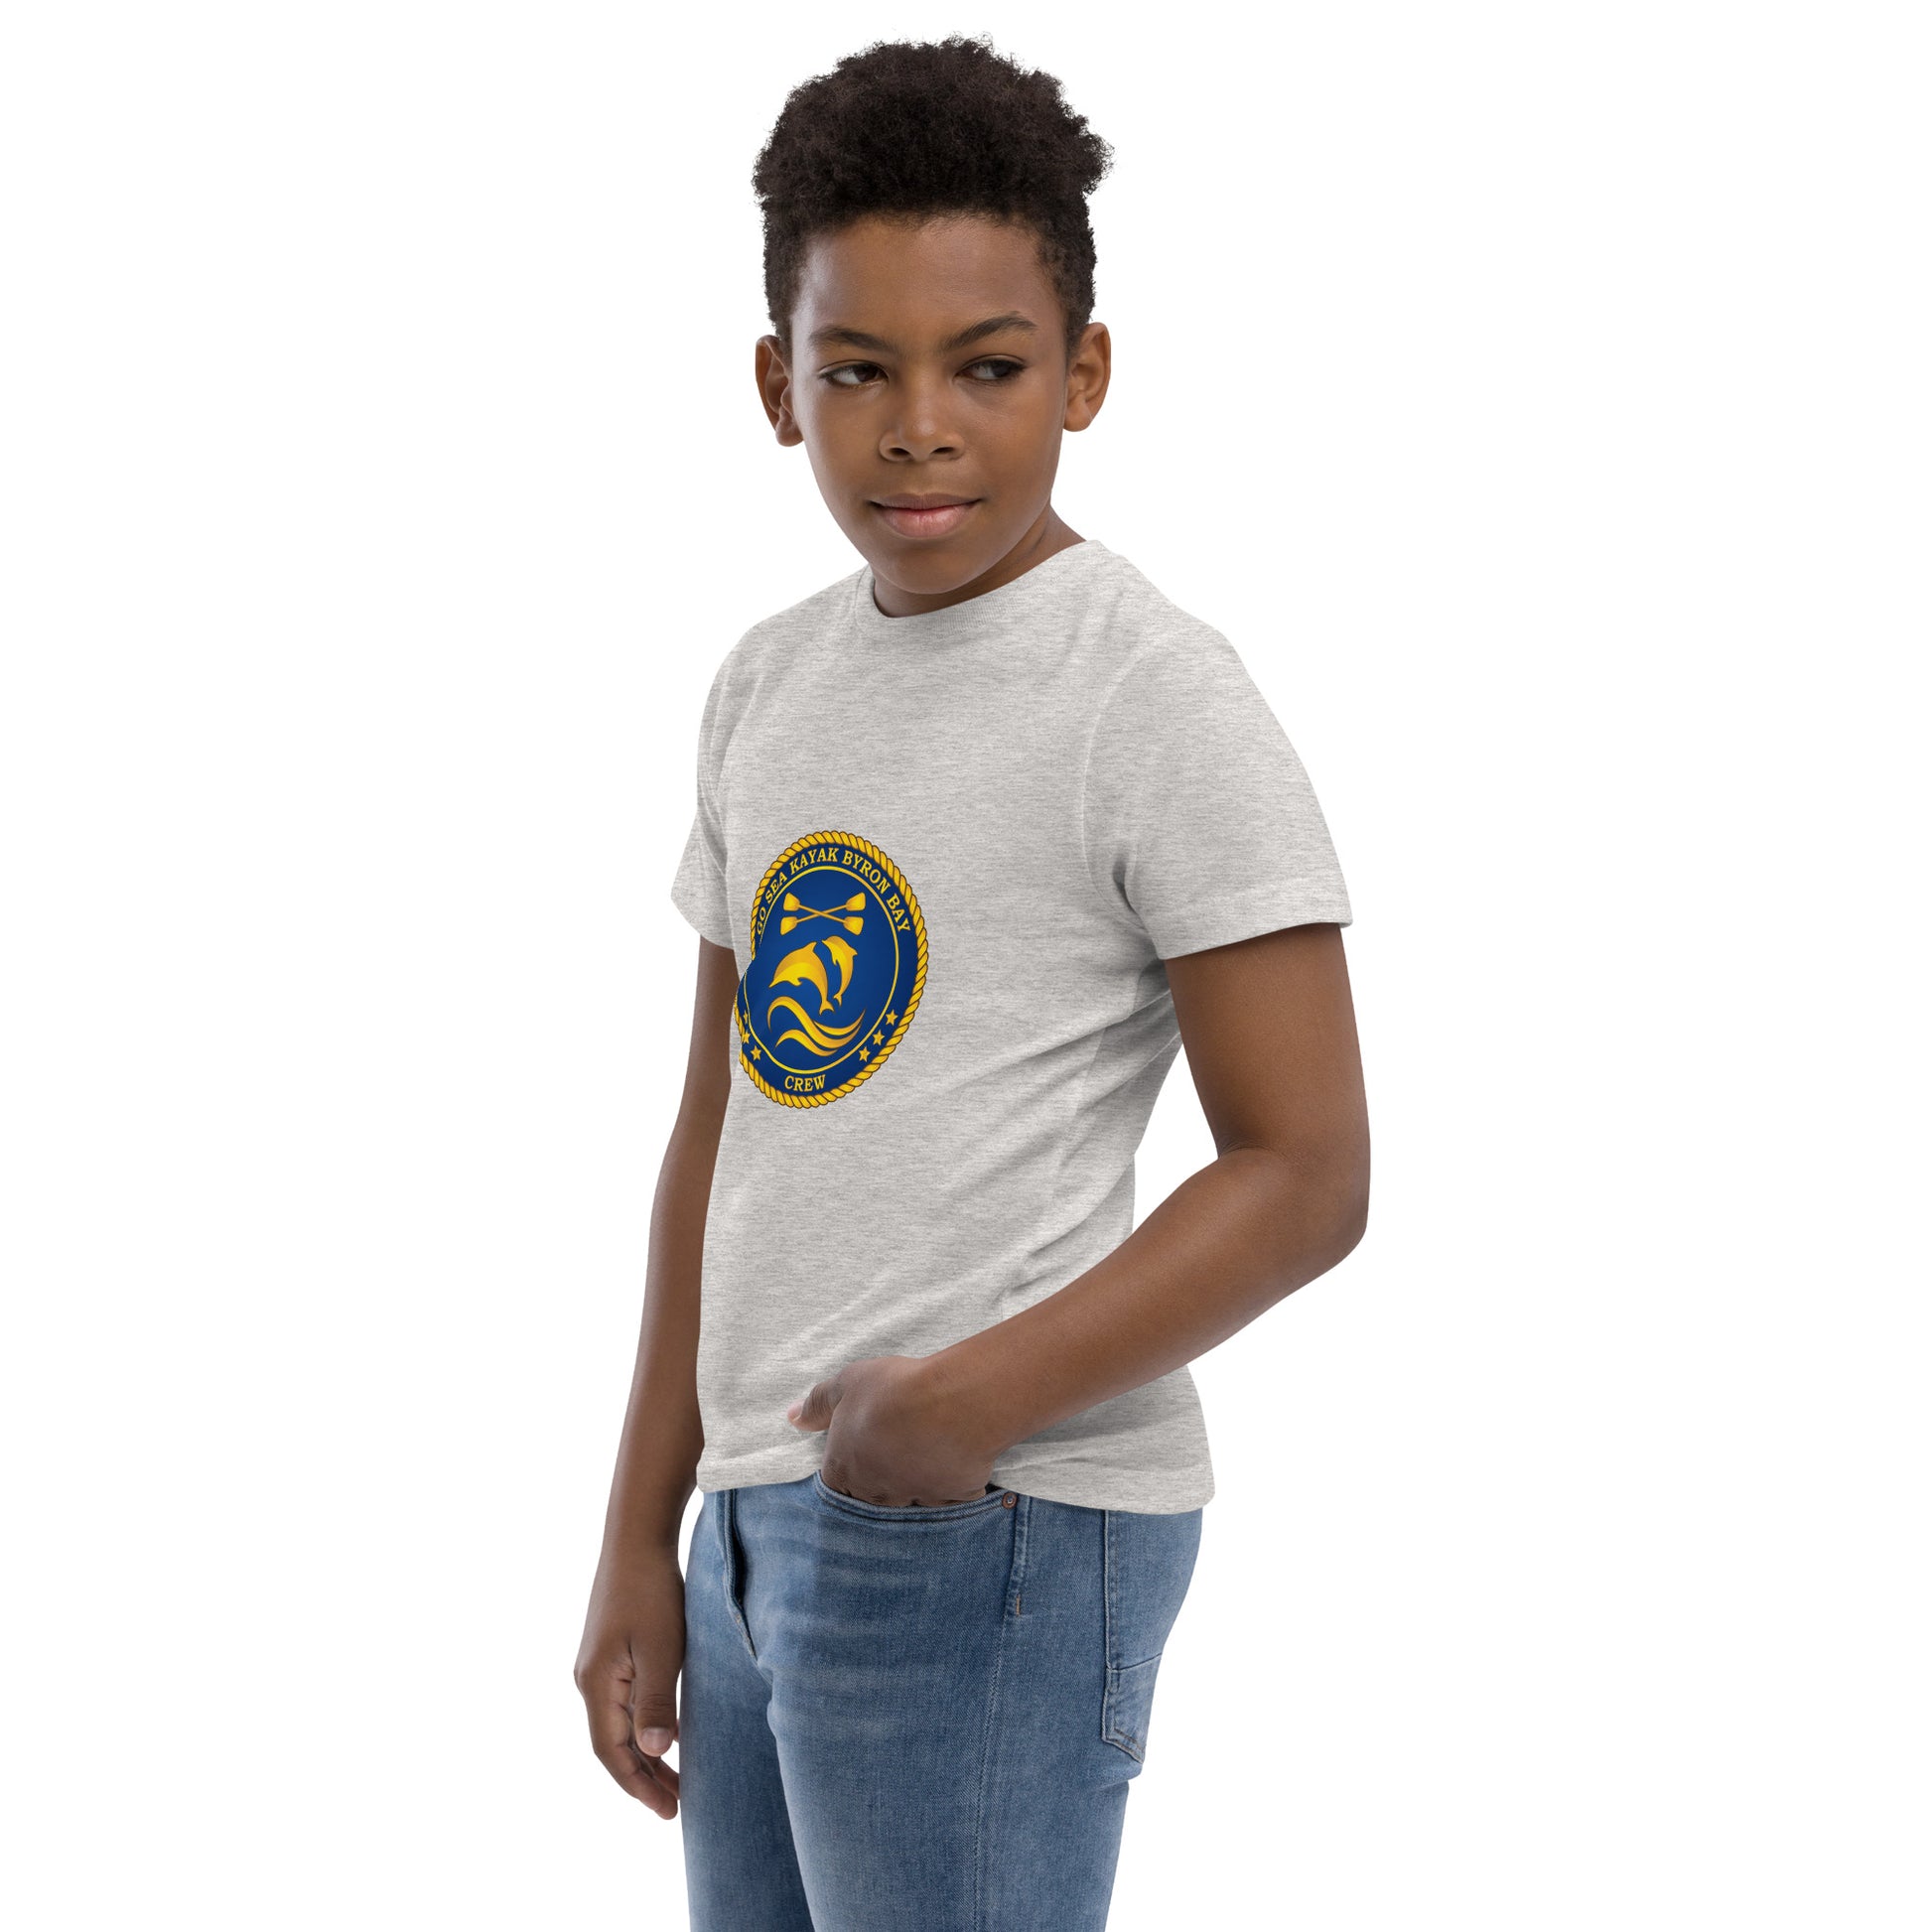  Kids T-Shirt - Natural / Heather colour - Side view, being warn on boy standing with a hand in his pocket - Go Sea Kayak Byron Bay Crew (issue 2018-2019) logo on front - Genuine Byron Bay Merchandise | Produced by Go Sea Kayak Byron Bay 